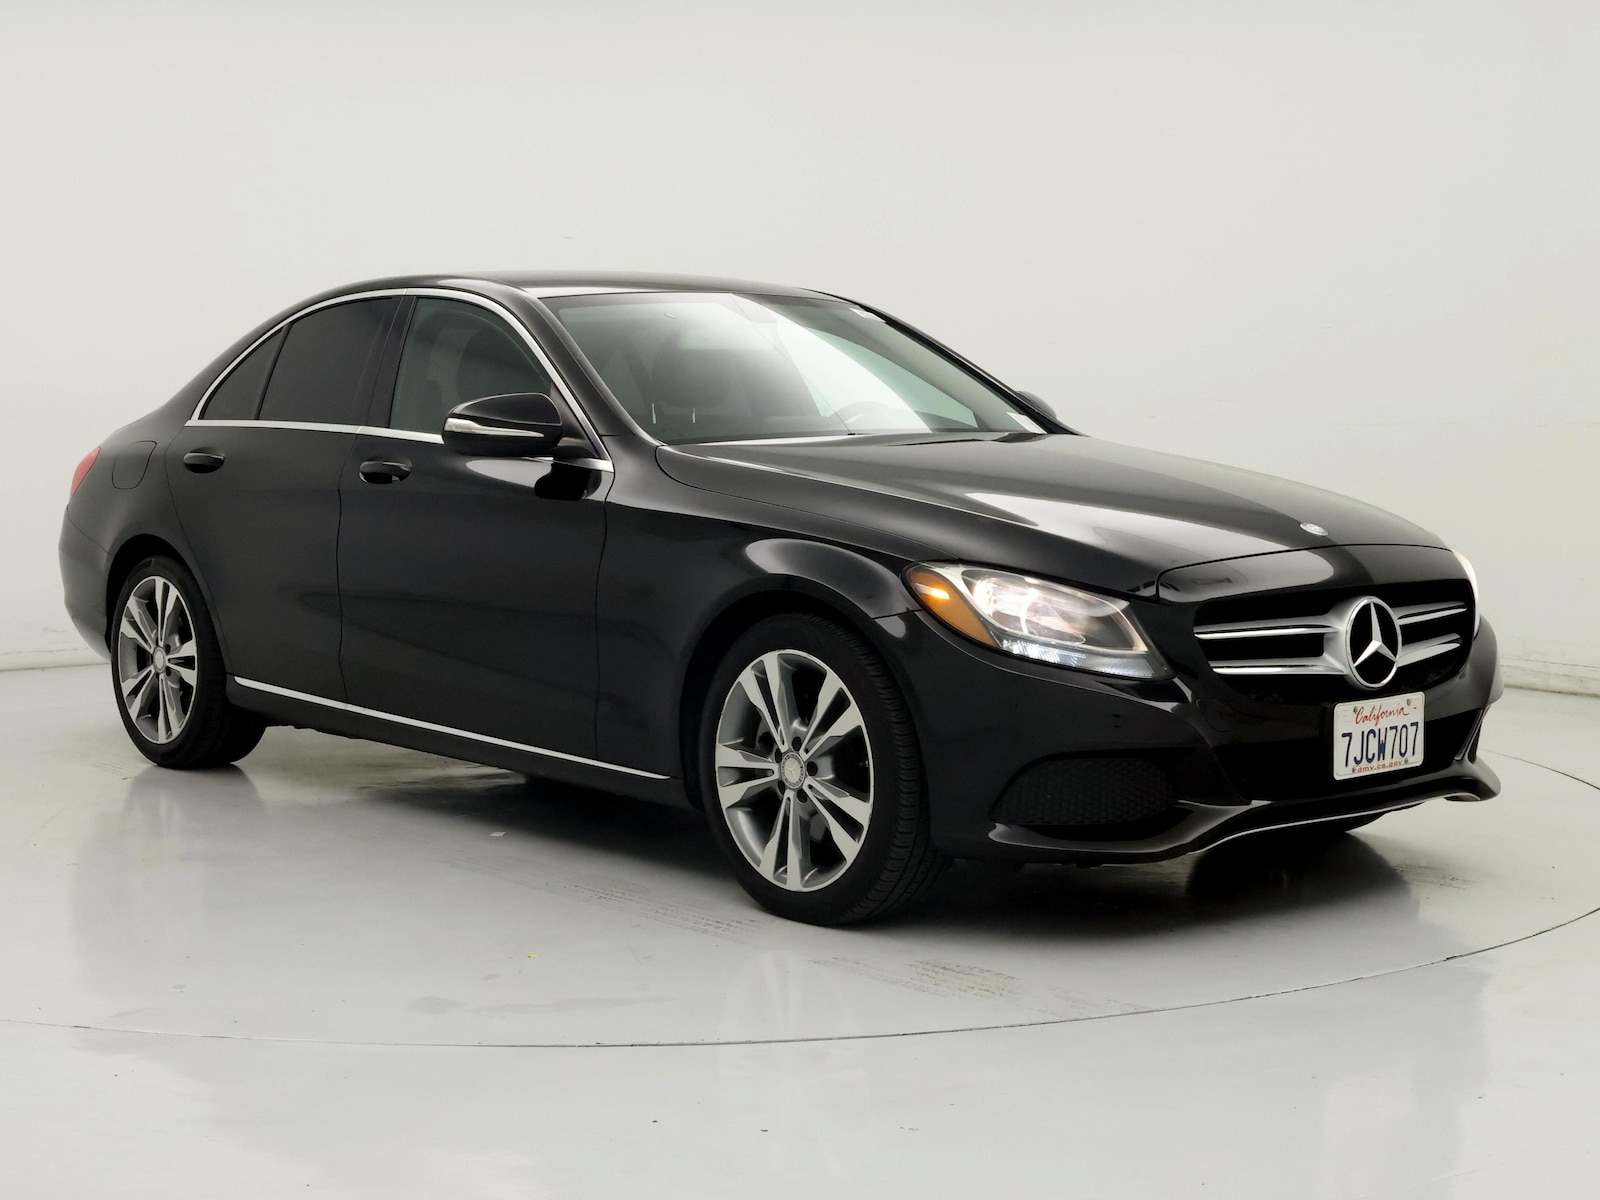 Used 2015 Mercedes-Benz C-Class C300 with VIN 55SWF4KB0FU019767 for sale in Spokane Valley, WA